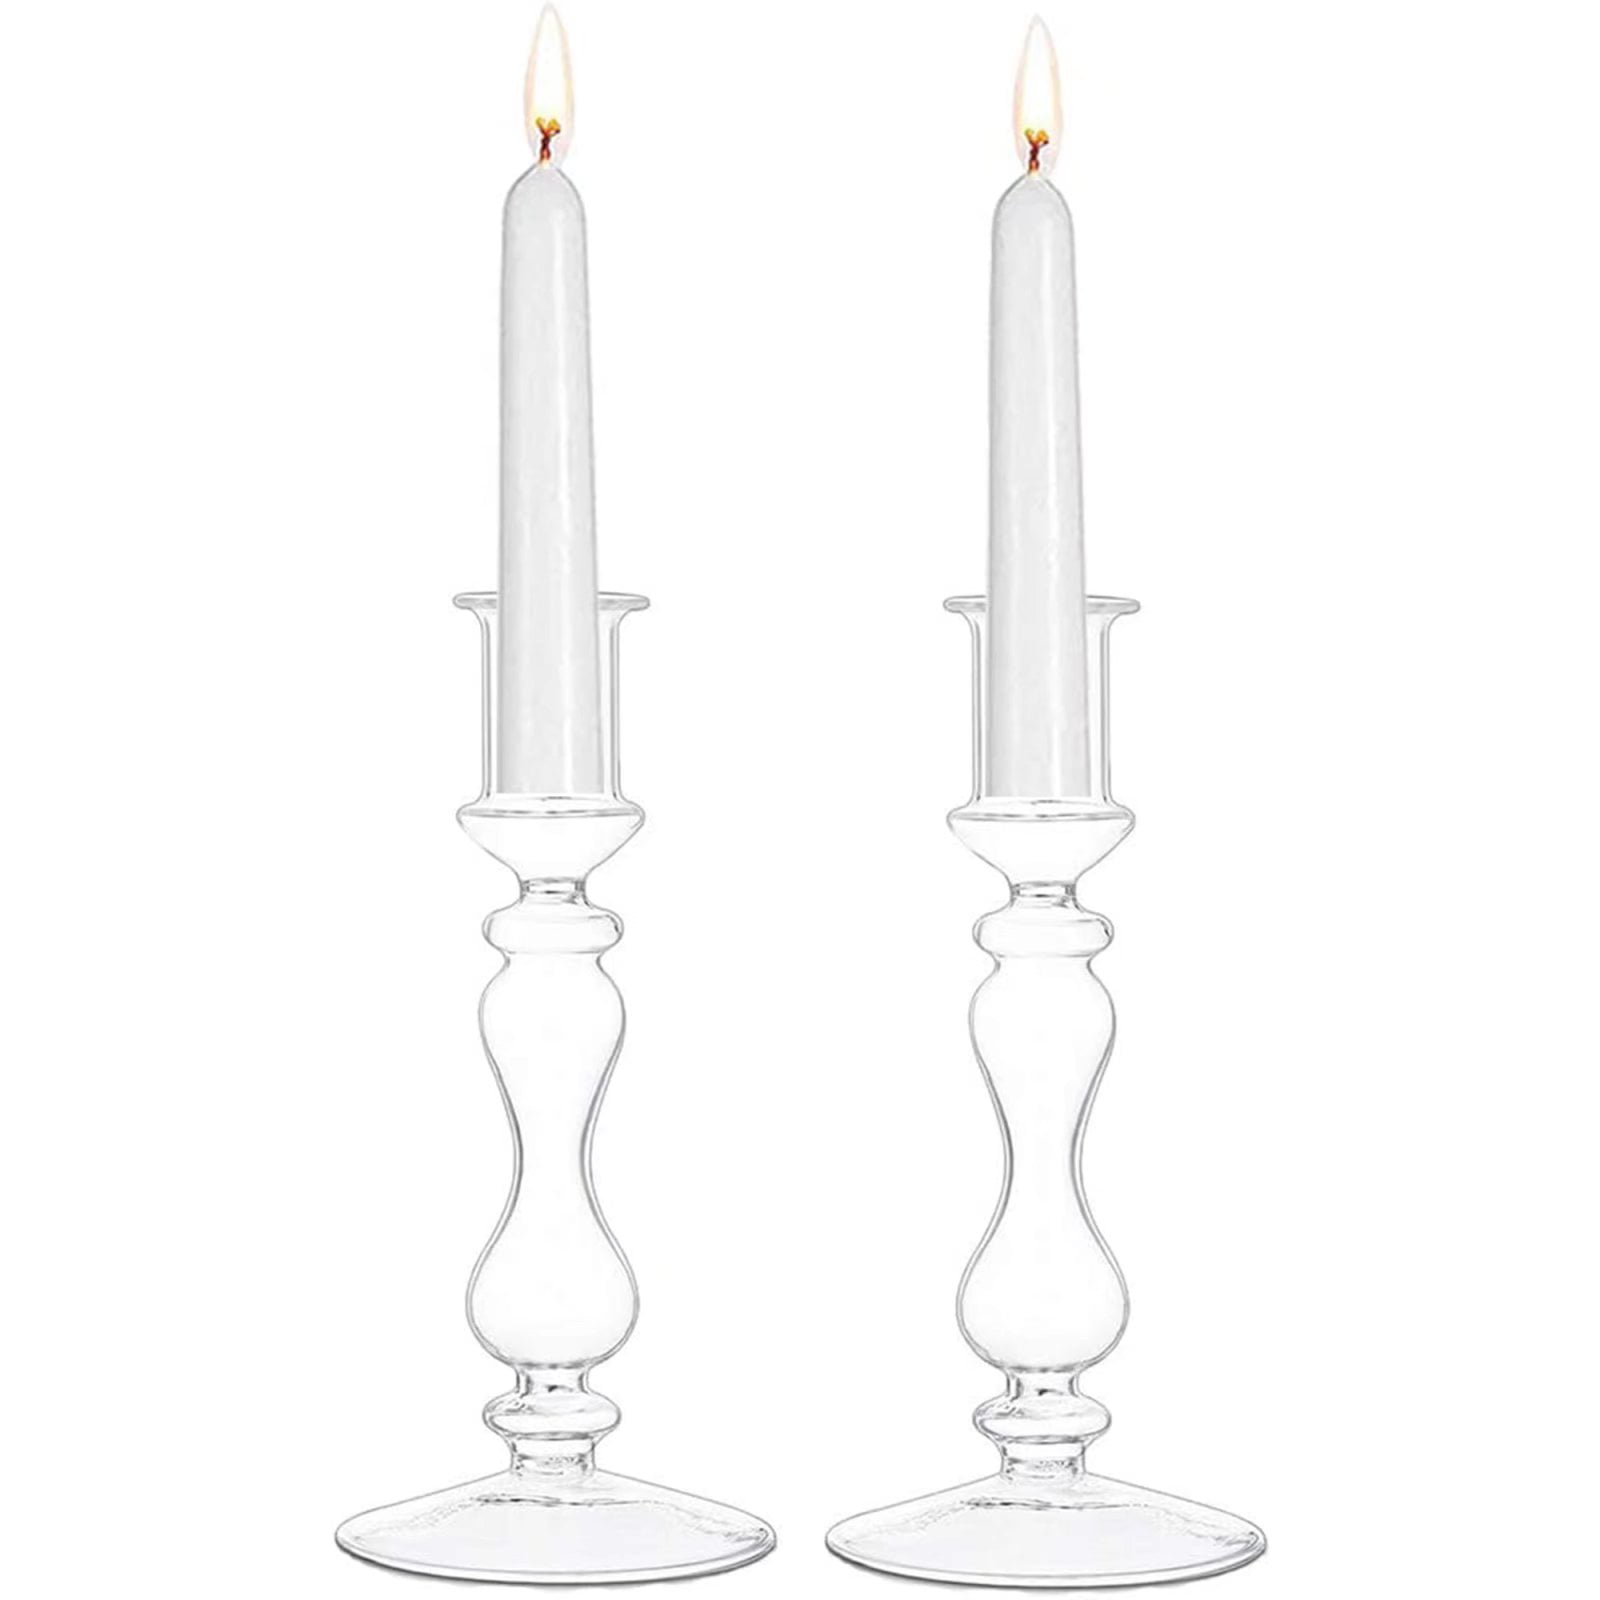 Glass Taper Candle Holders 2Pcs Wide Base Candlestick Holder Table Decorations Fits 2cm Taper Candles Indoor Outdoor for Wedding Party Dinning